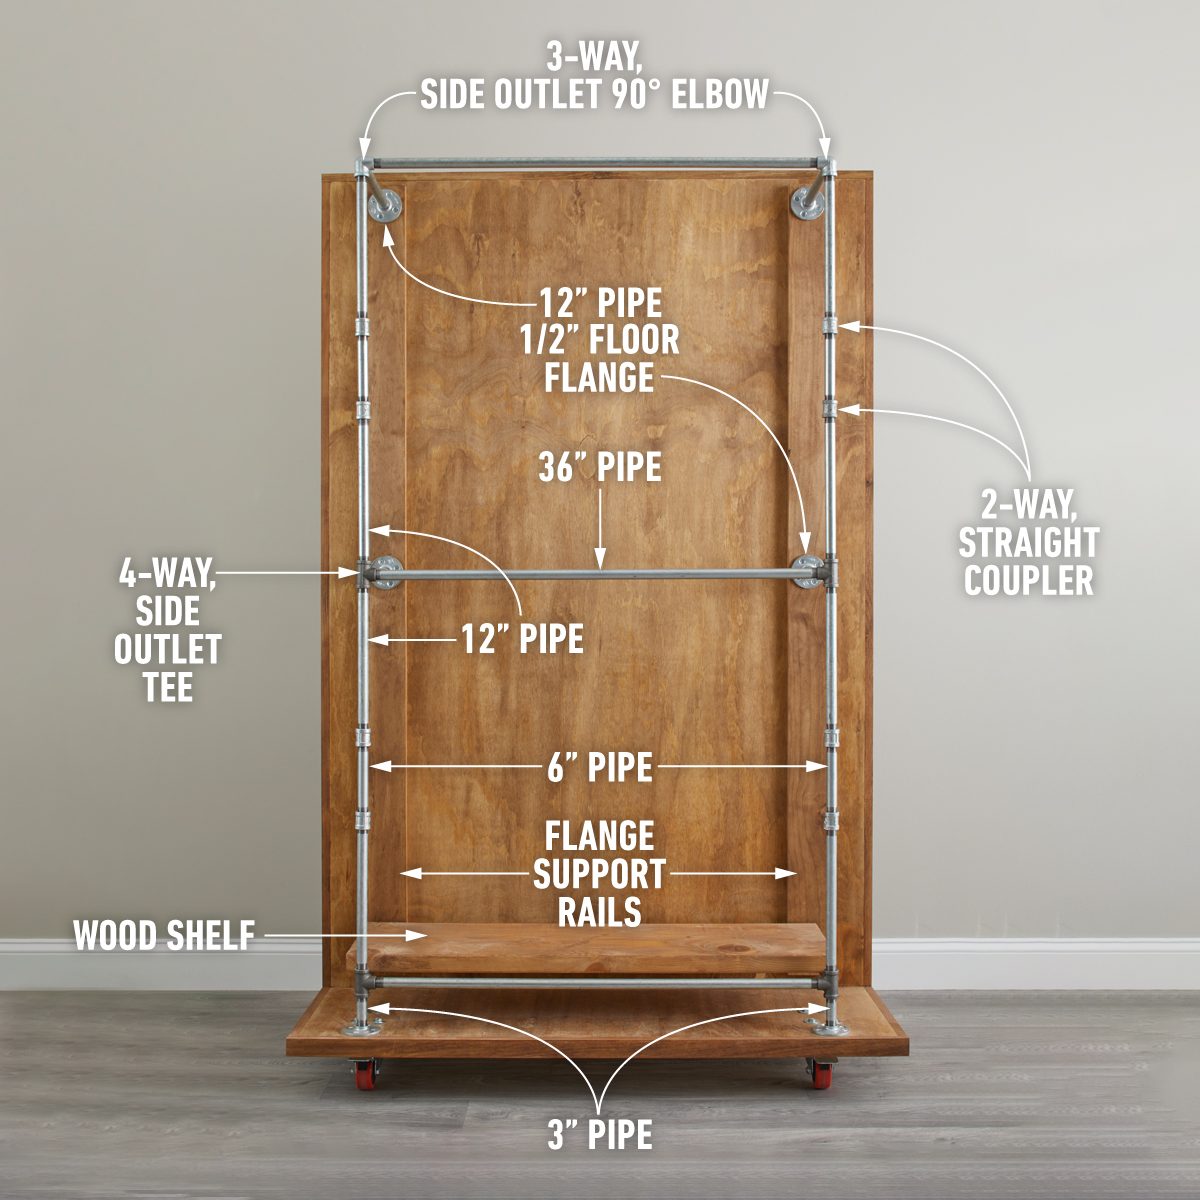 How To Make A Clothes Rack On Wheels Assemble the plumbing fittings for the front wall